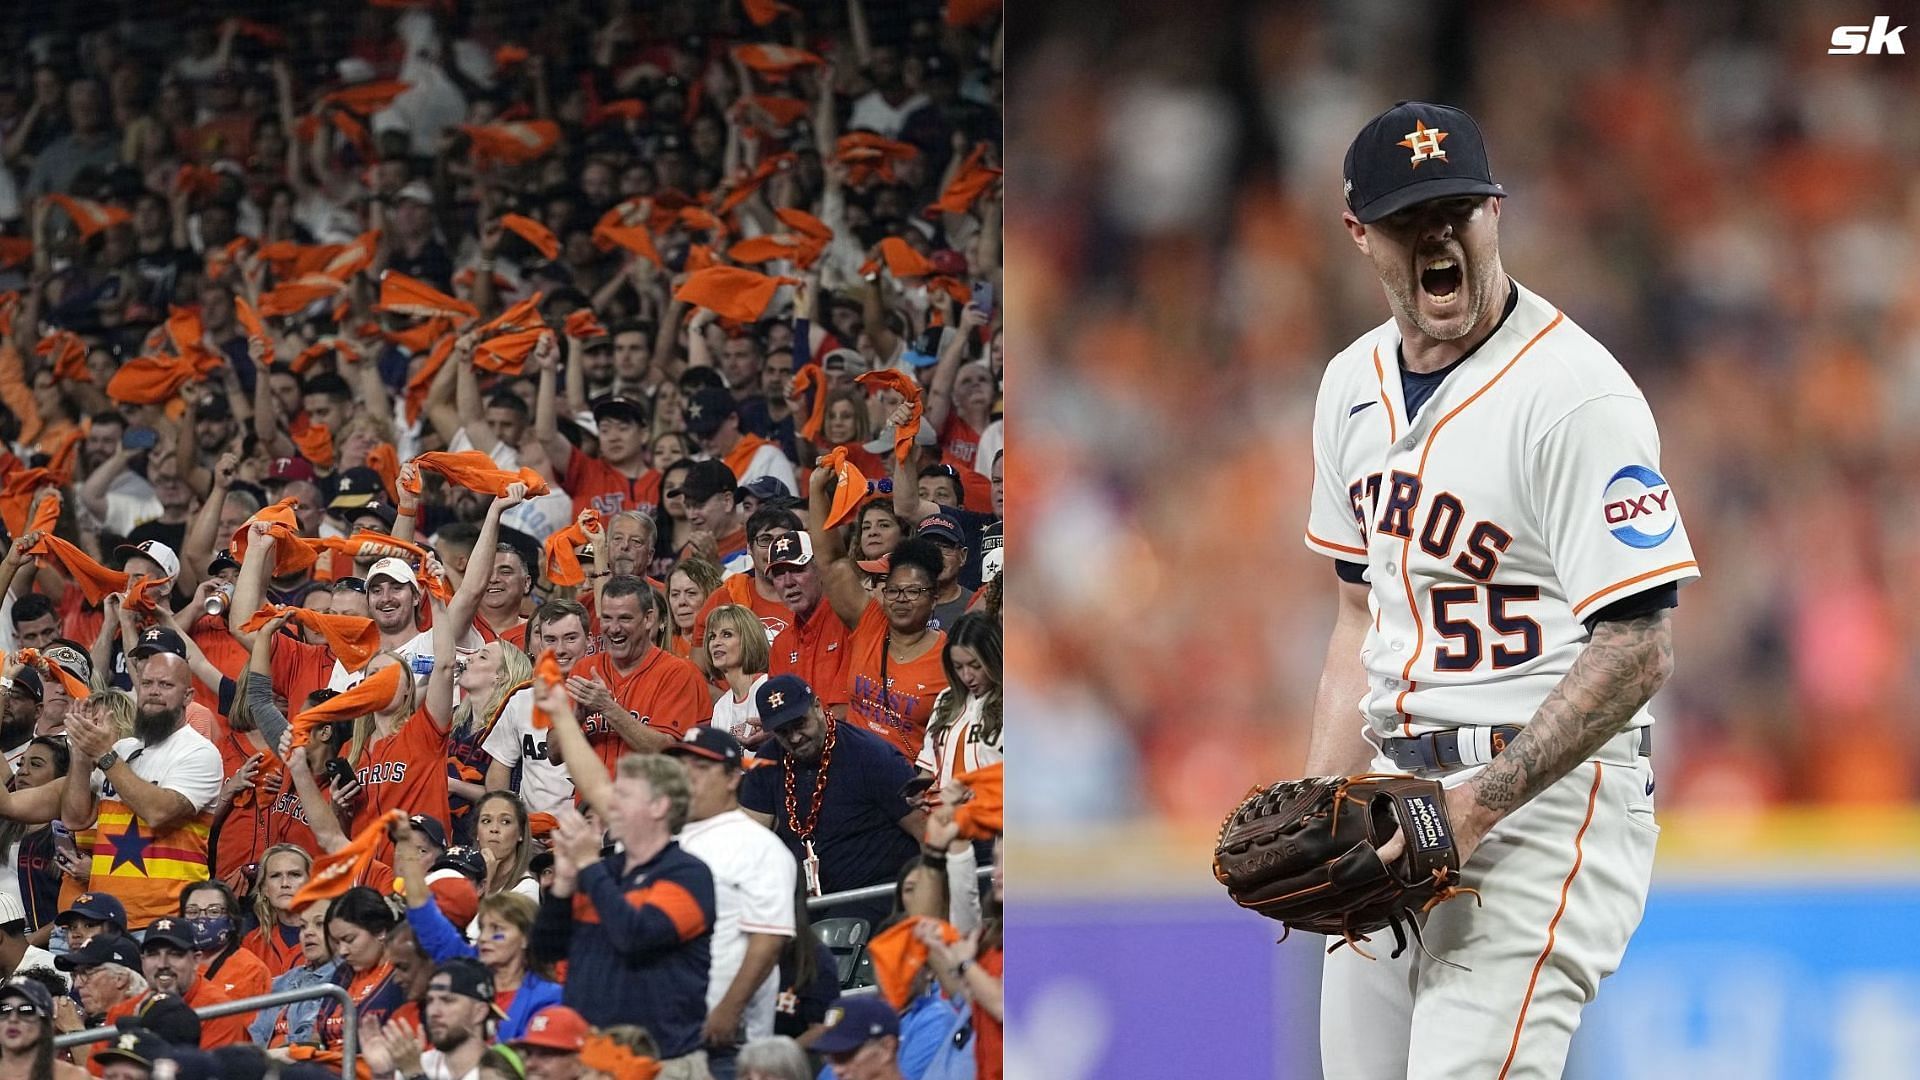 Video Of Female Houston Astros Fan Is Going Viral - The Spun: What's  Trending In The Sports World Today